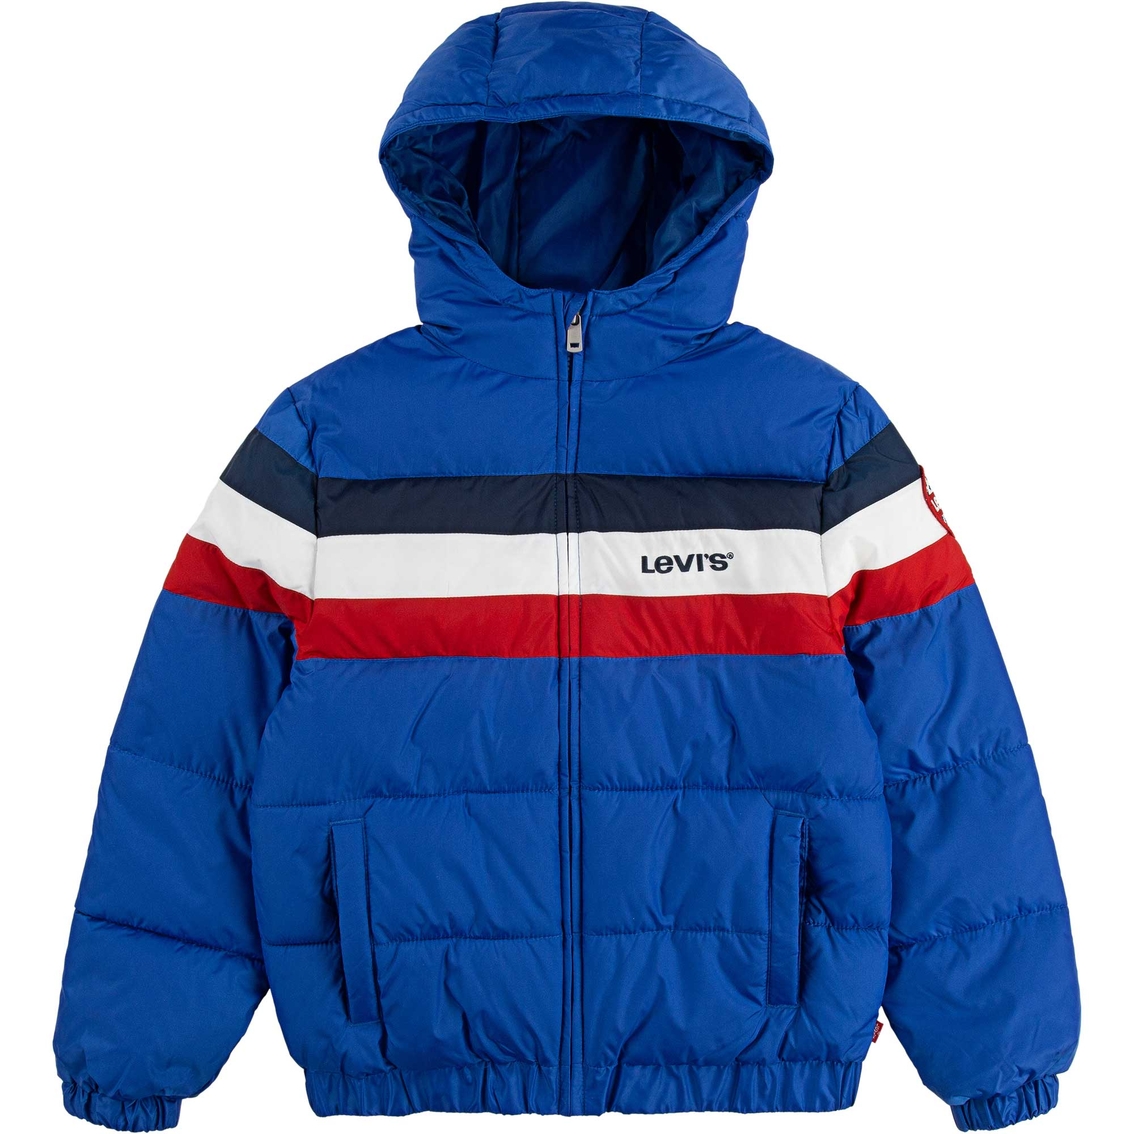 Levi's Boys Colorblock Puffer Coat | Boys 8-20 | Clothing & Accessories ...